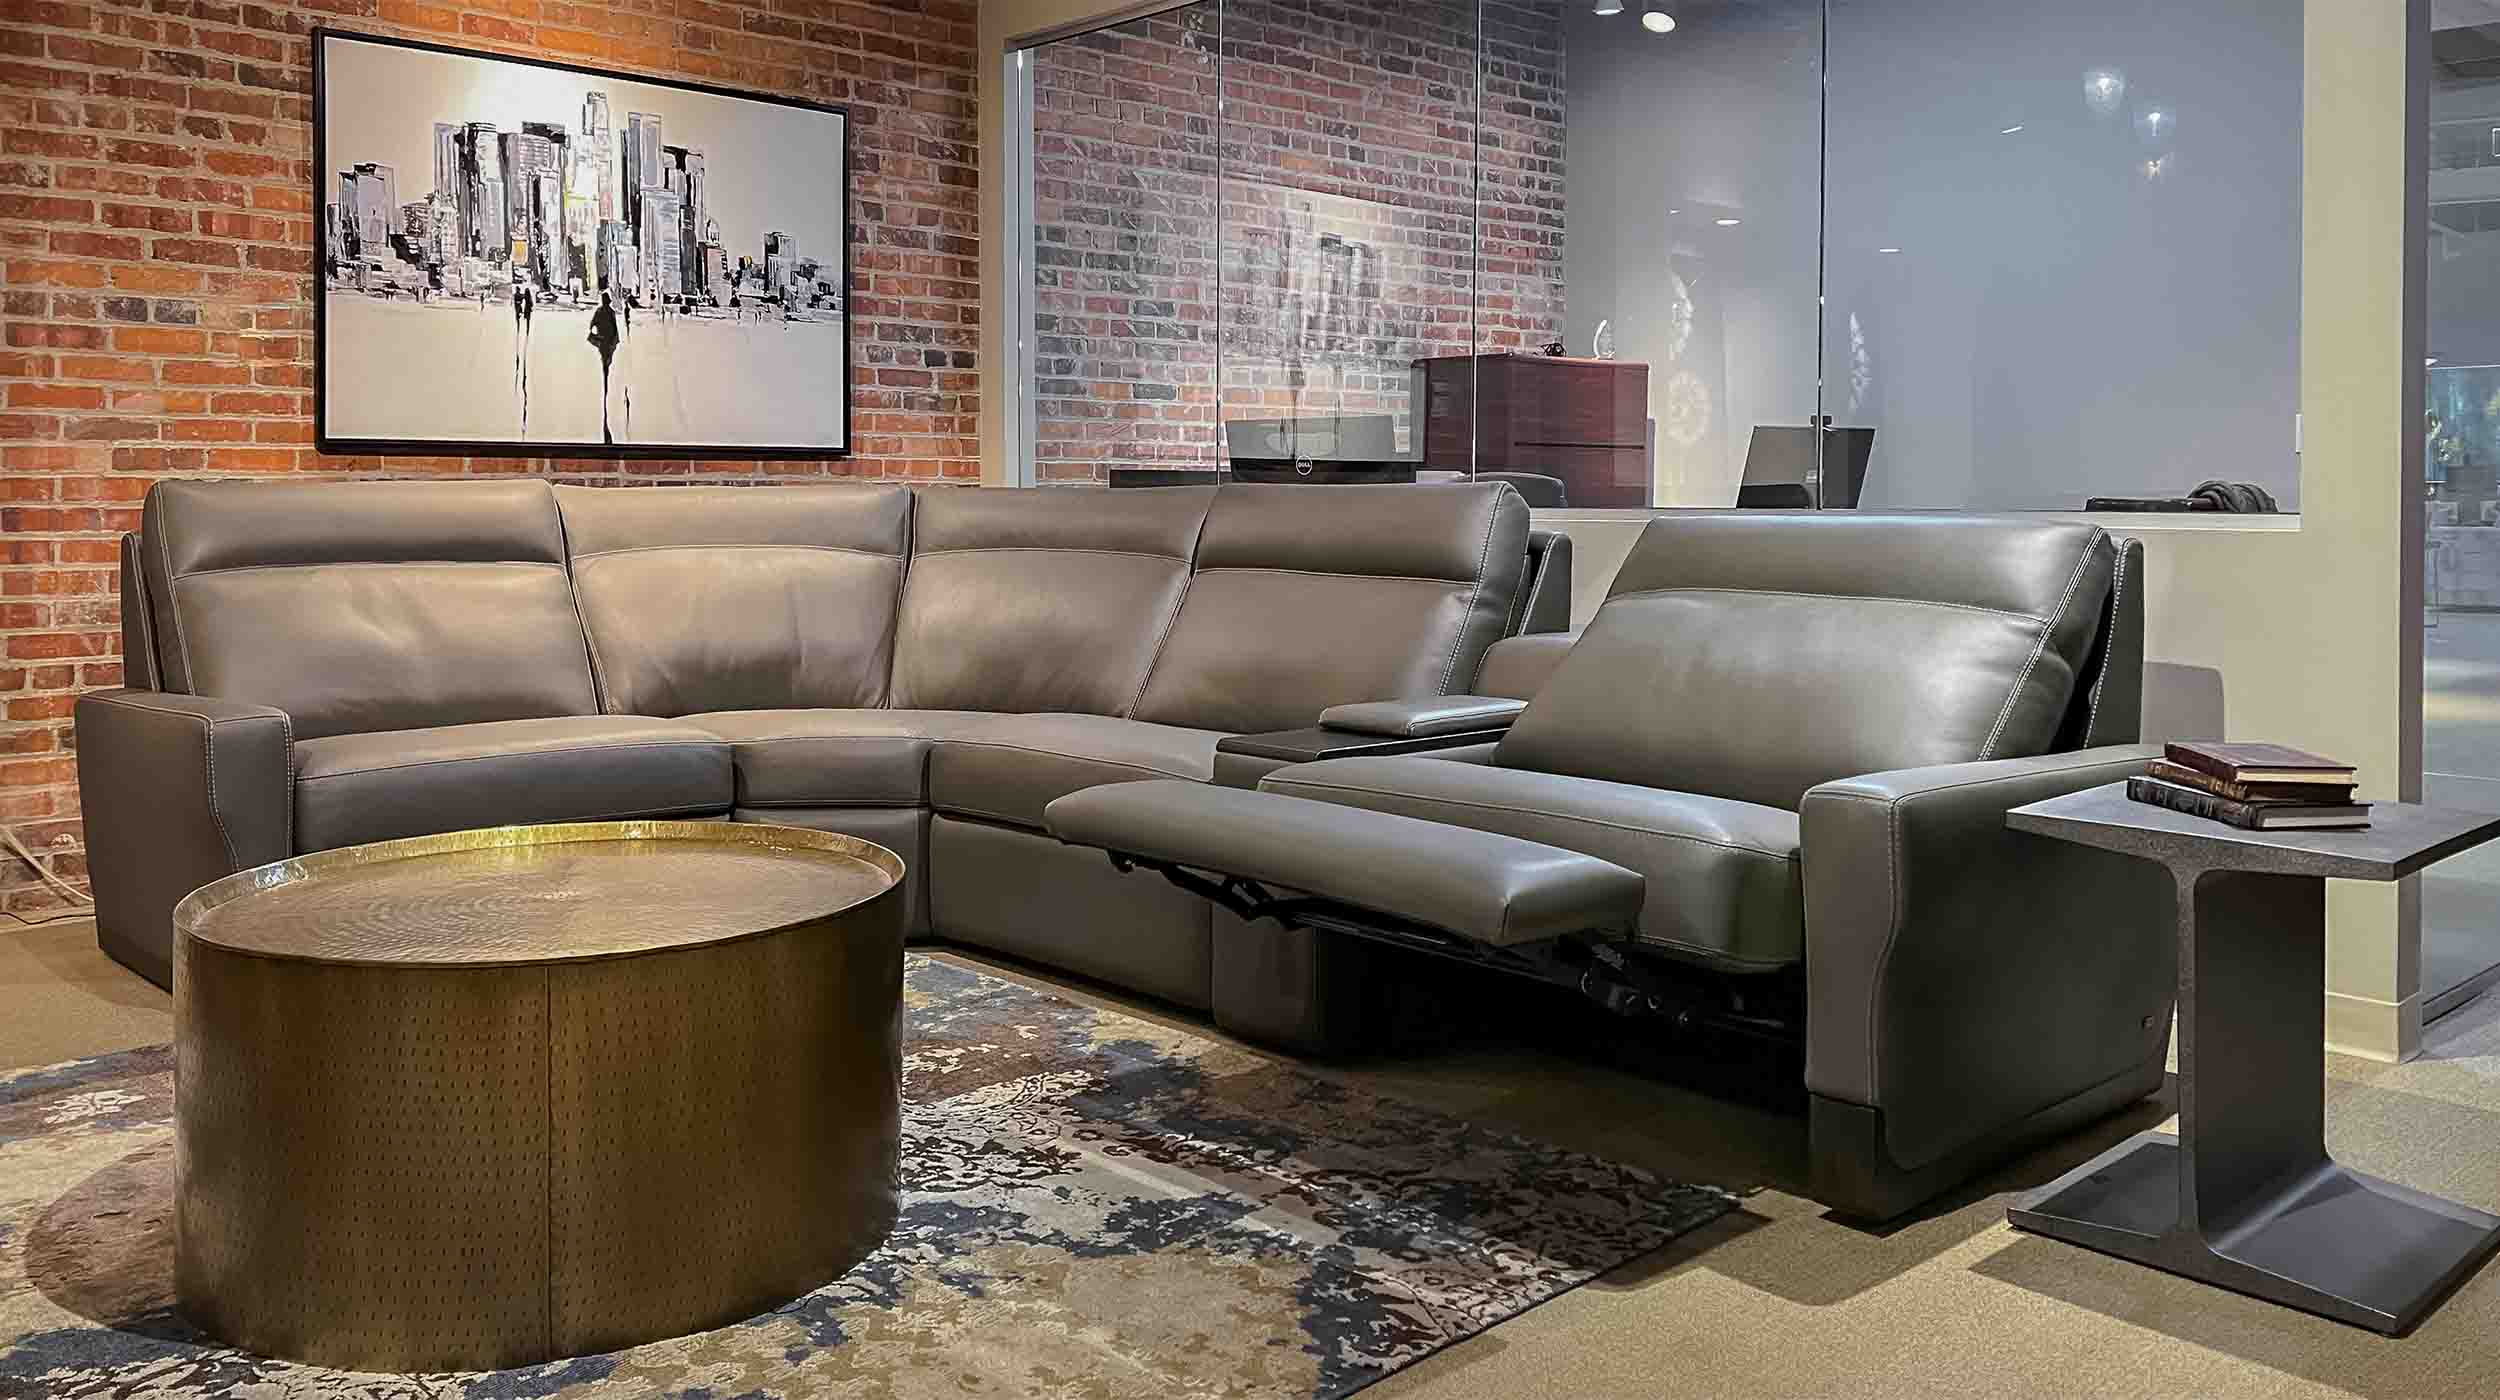 american-leather-breckenridge-style-in-motion-sectional-web-fw